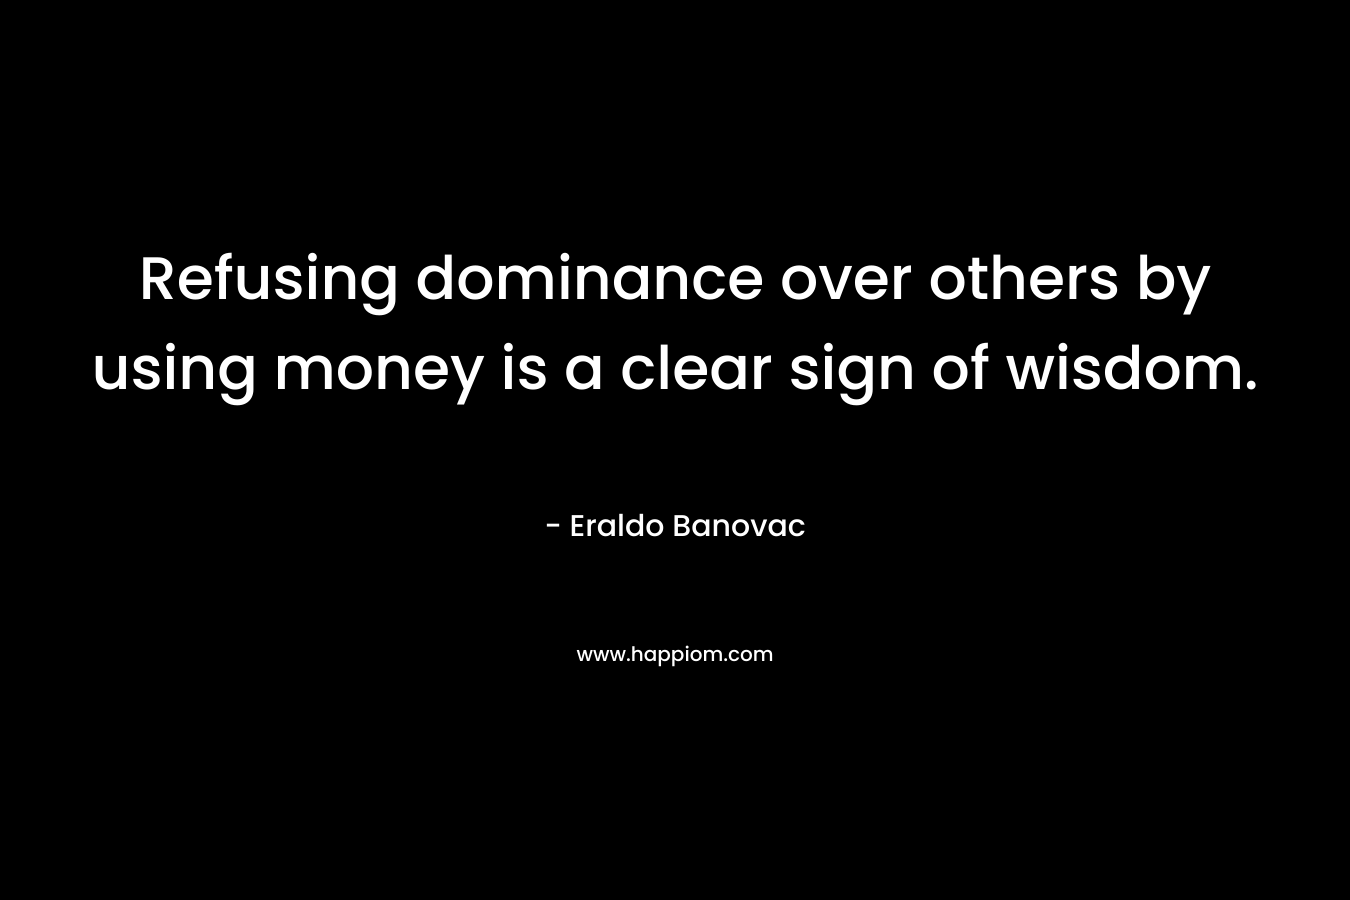 Refusing dominance over others by using money is a clear sign of wisdom.